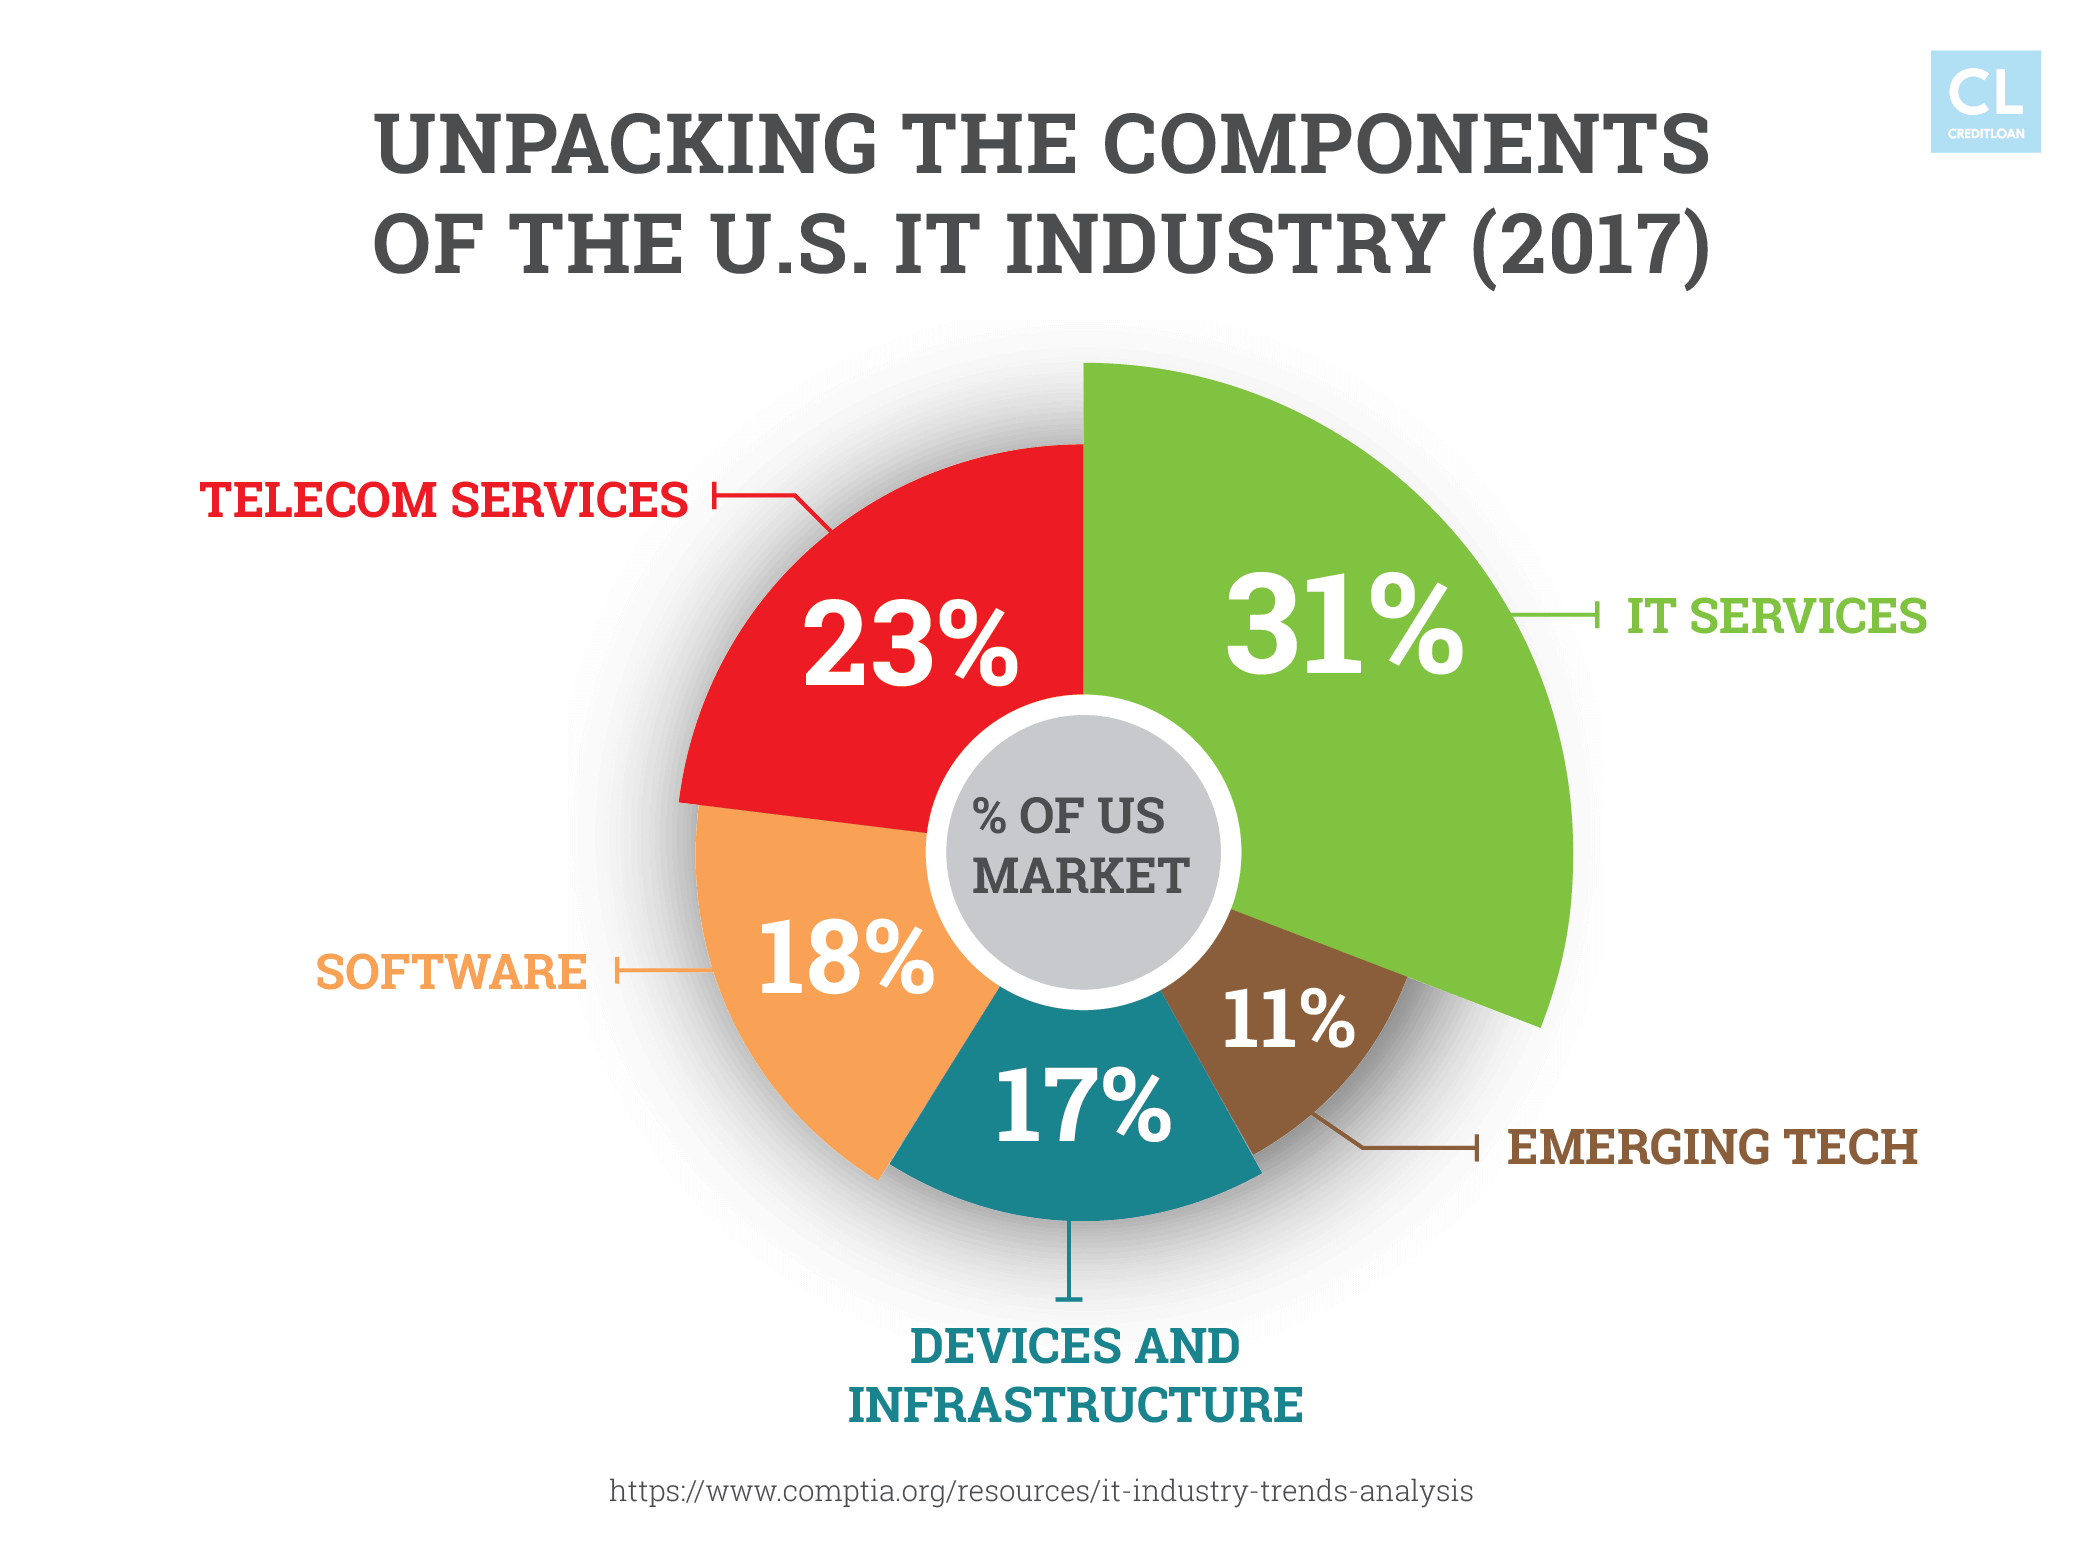 Unpacking the Components of the U.S. IT Industry (2017)